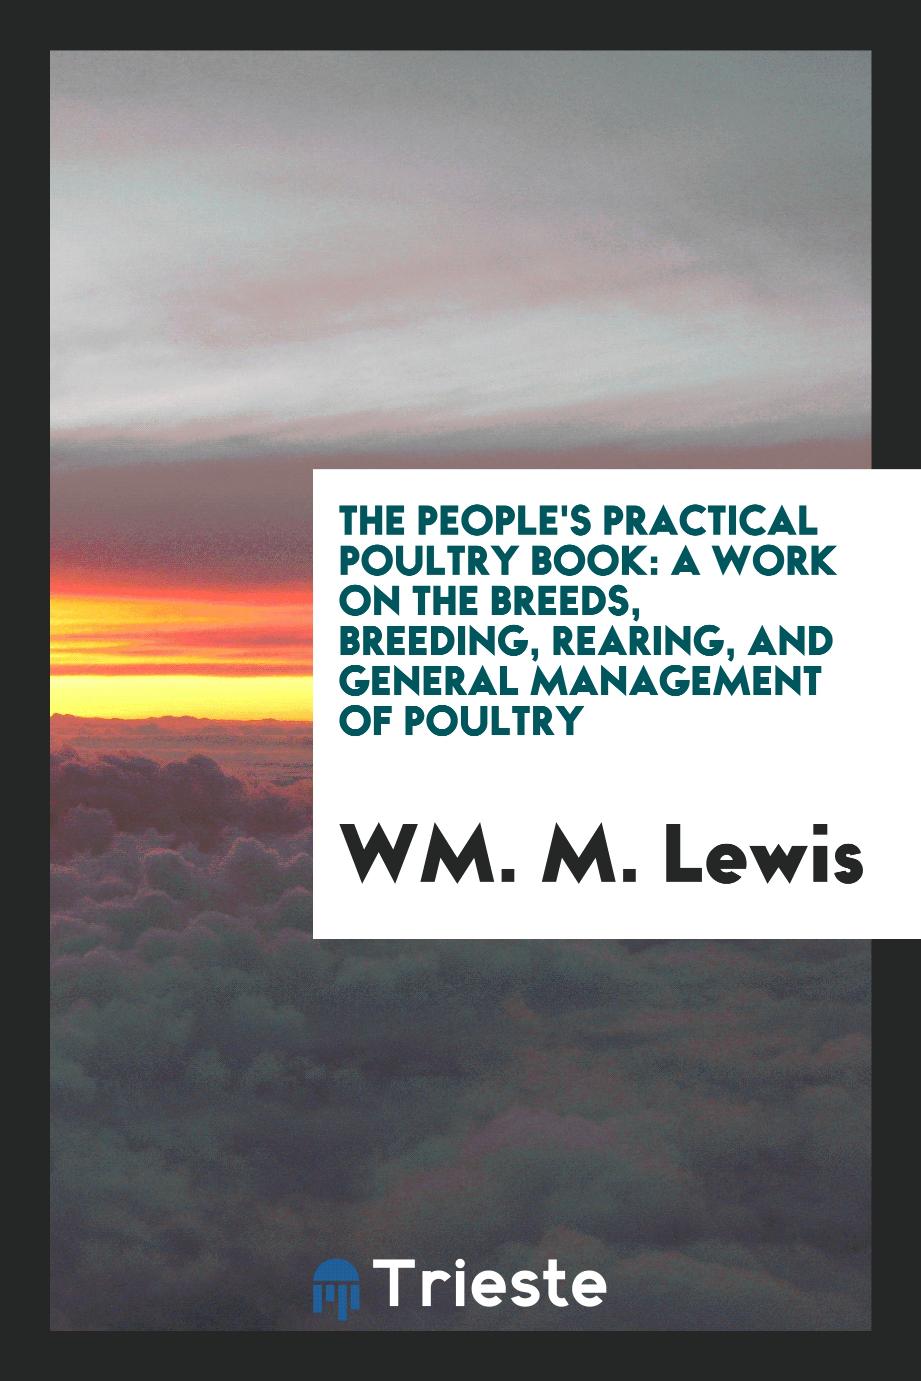 The people's practical poultry book: a work on the breeds, breeding, rearing, and general management of poultry